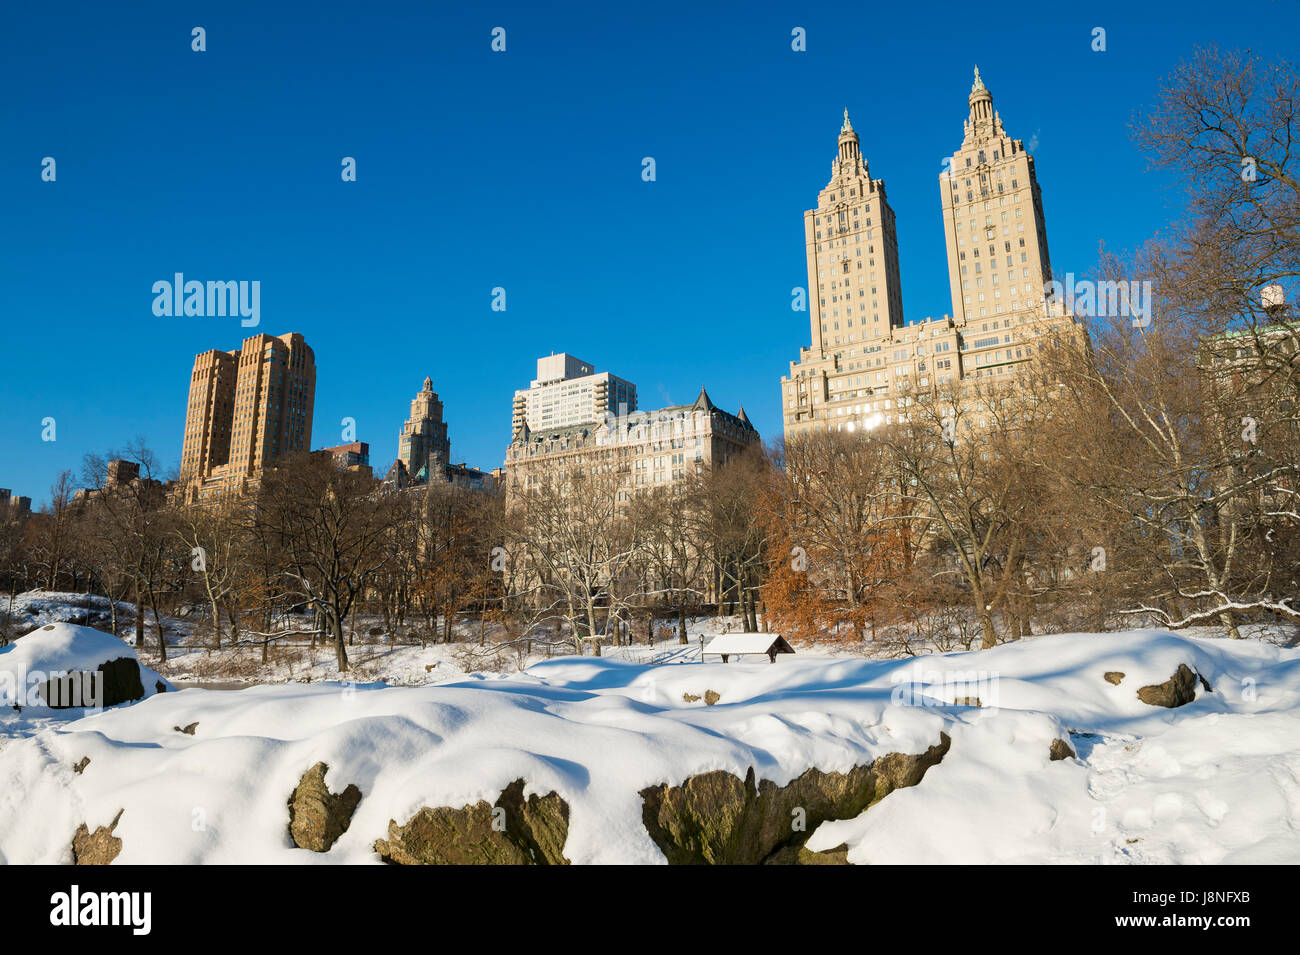 Scenic view of the Upper West Side skyline from the rocky edge of the Central Park lake the morning after a winter snow storm in New York City Stock Photo